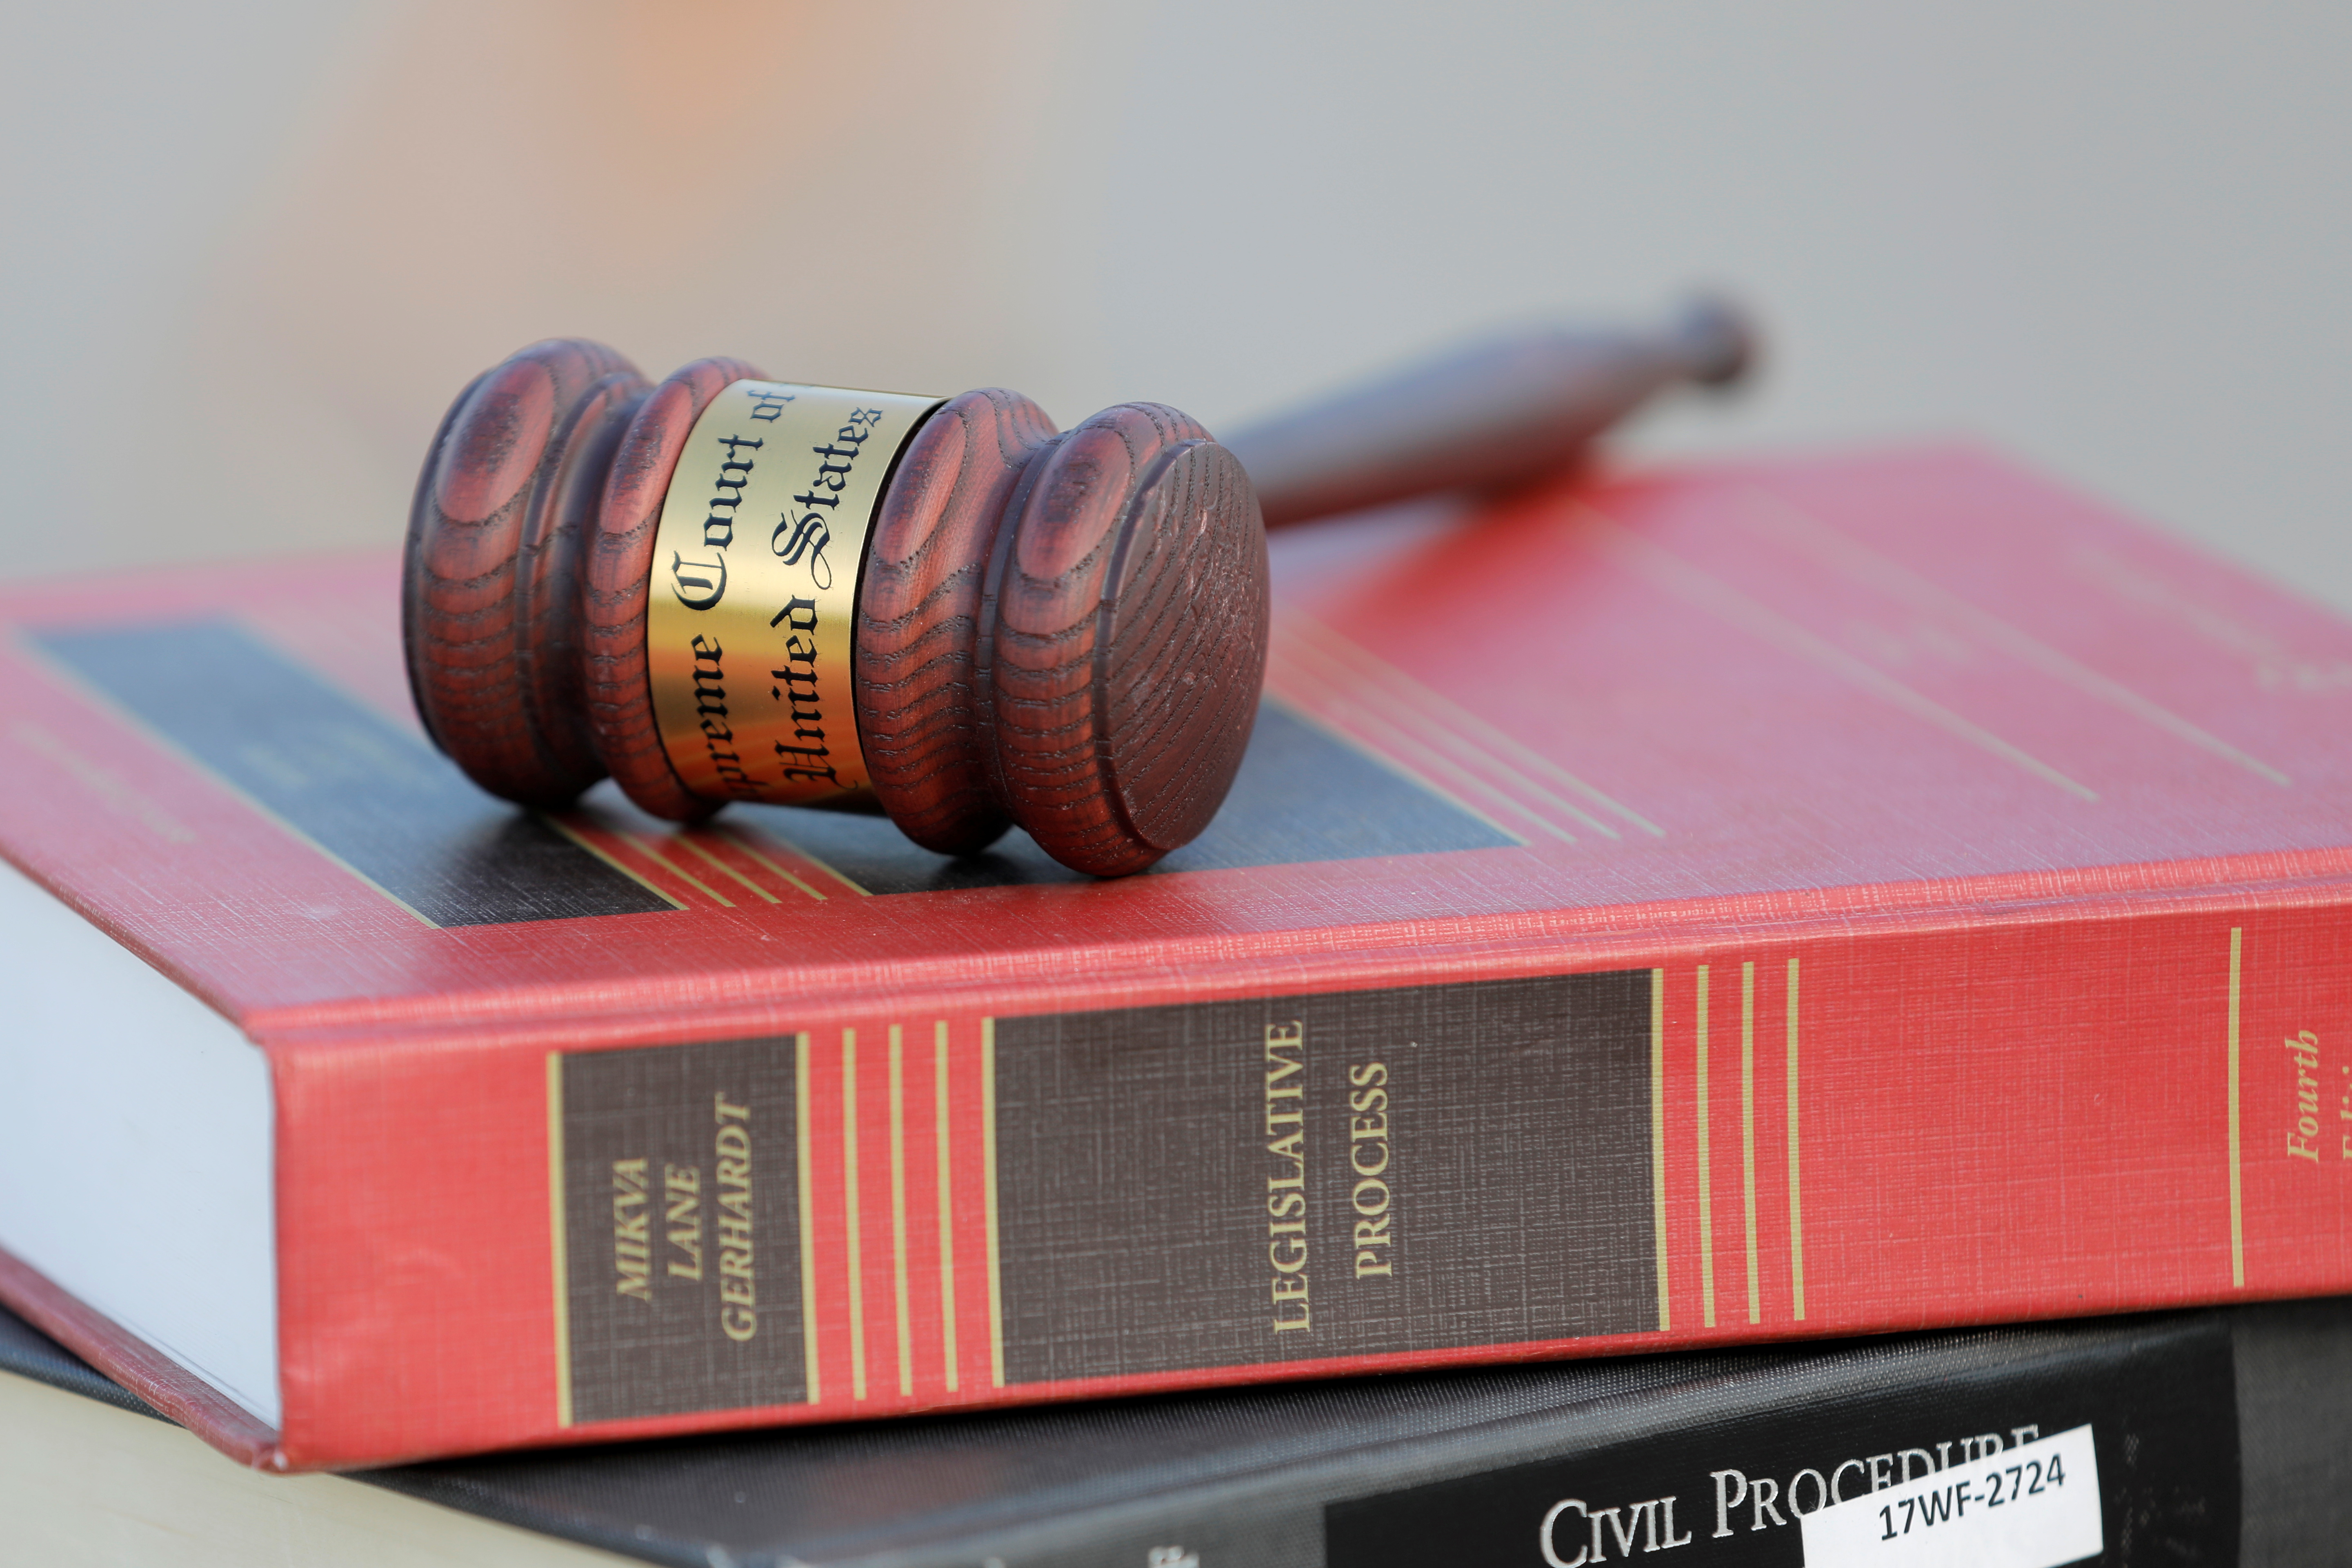 A gavel is seen on legal books in Washington, D.C.